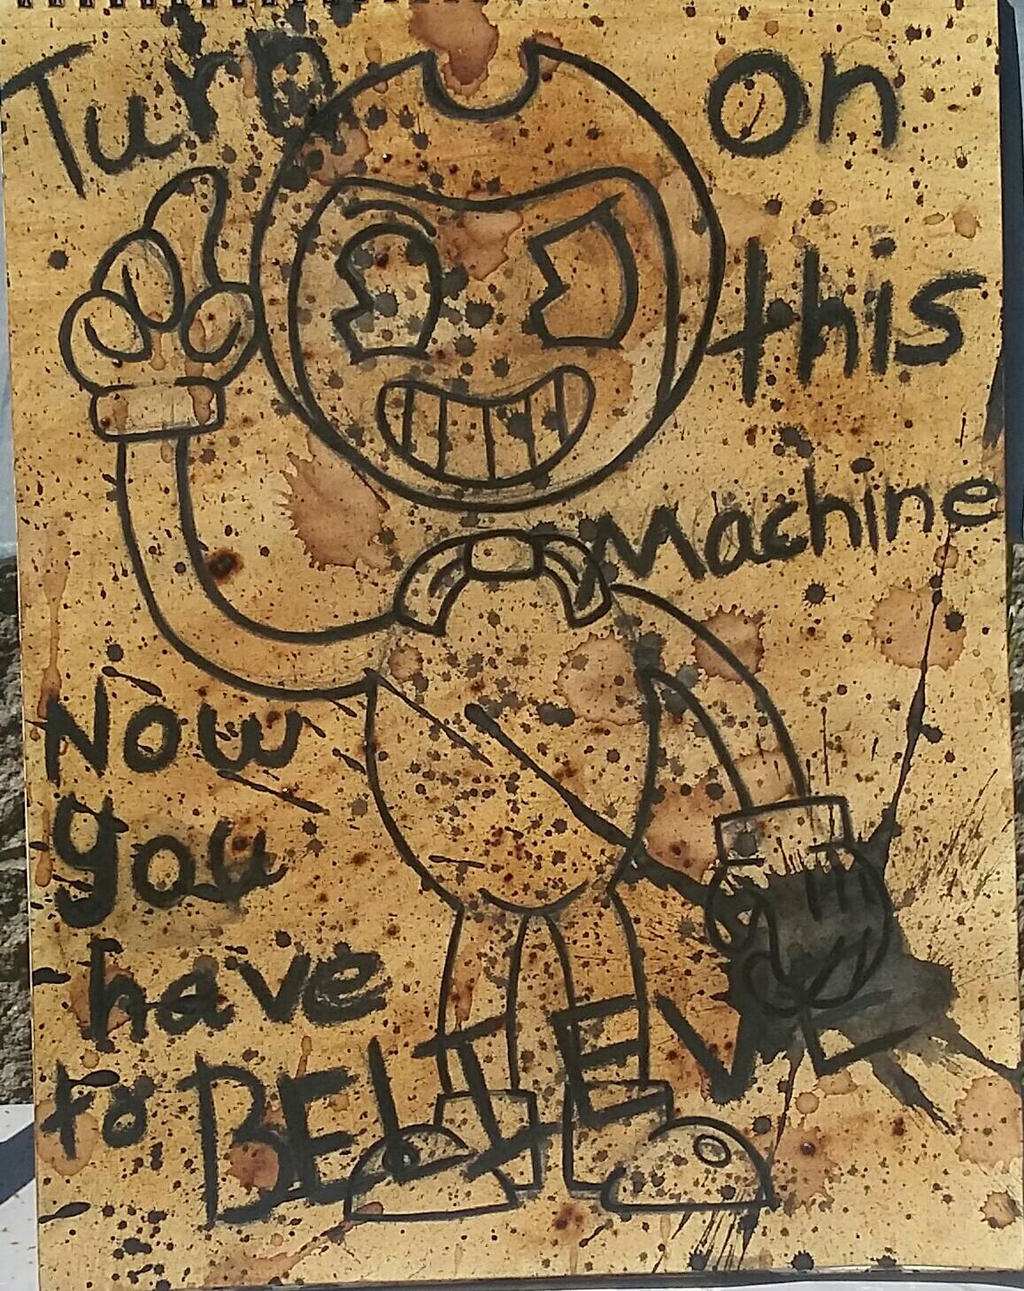 Bendy and the ink machine fanart 